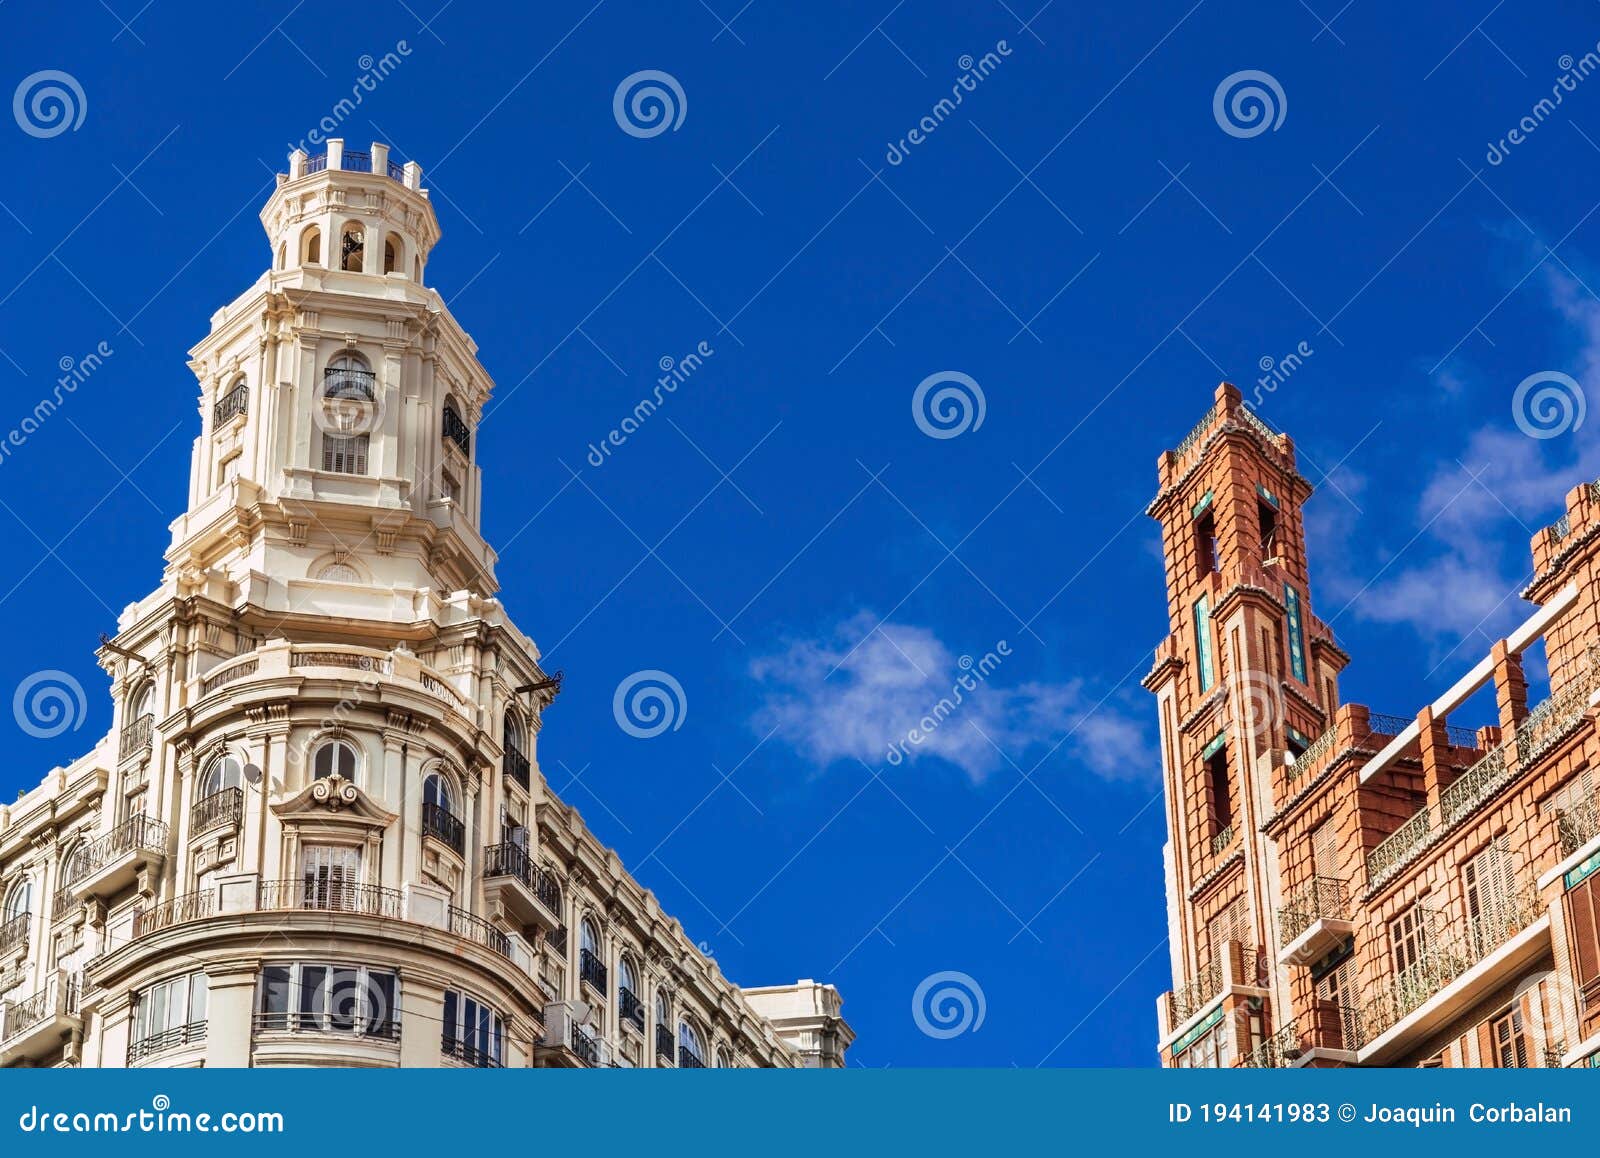 buildings with modernist style towers in the plaza del ayuntamiento in valencia